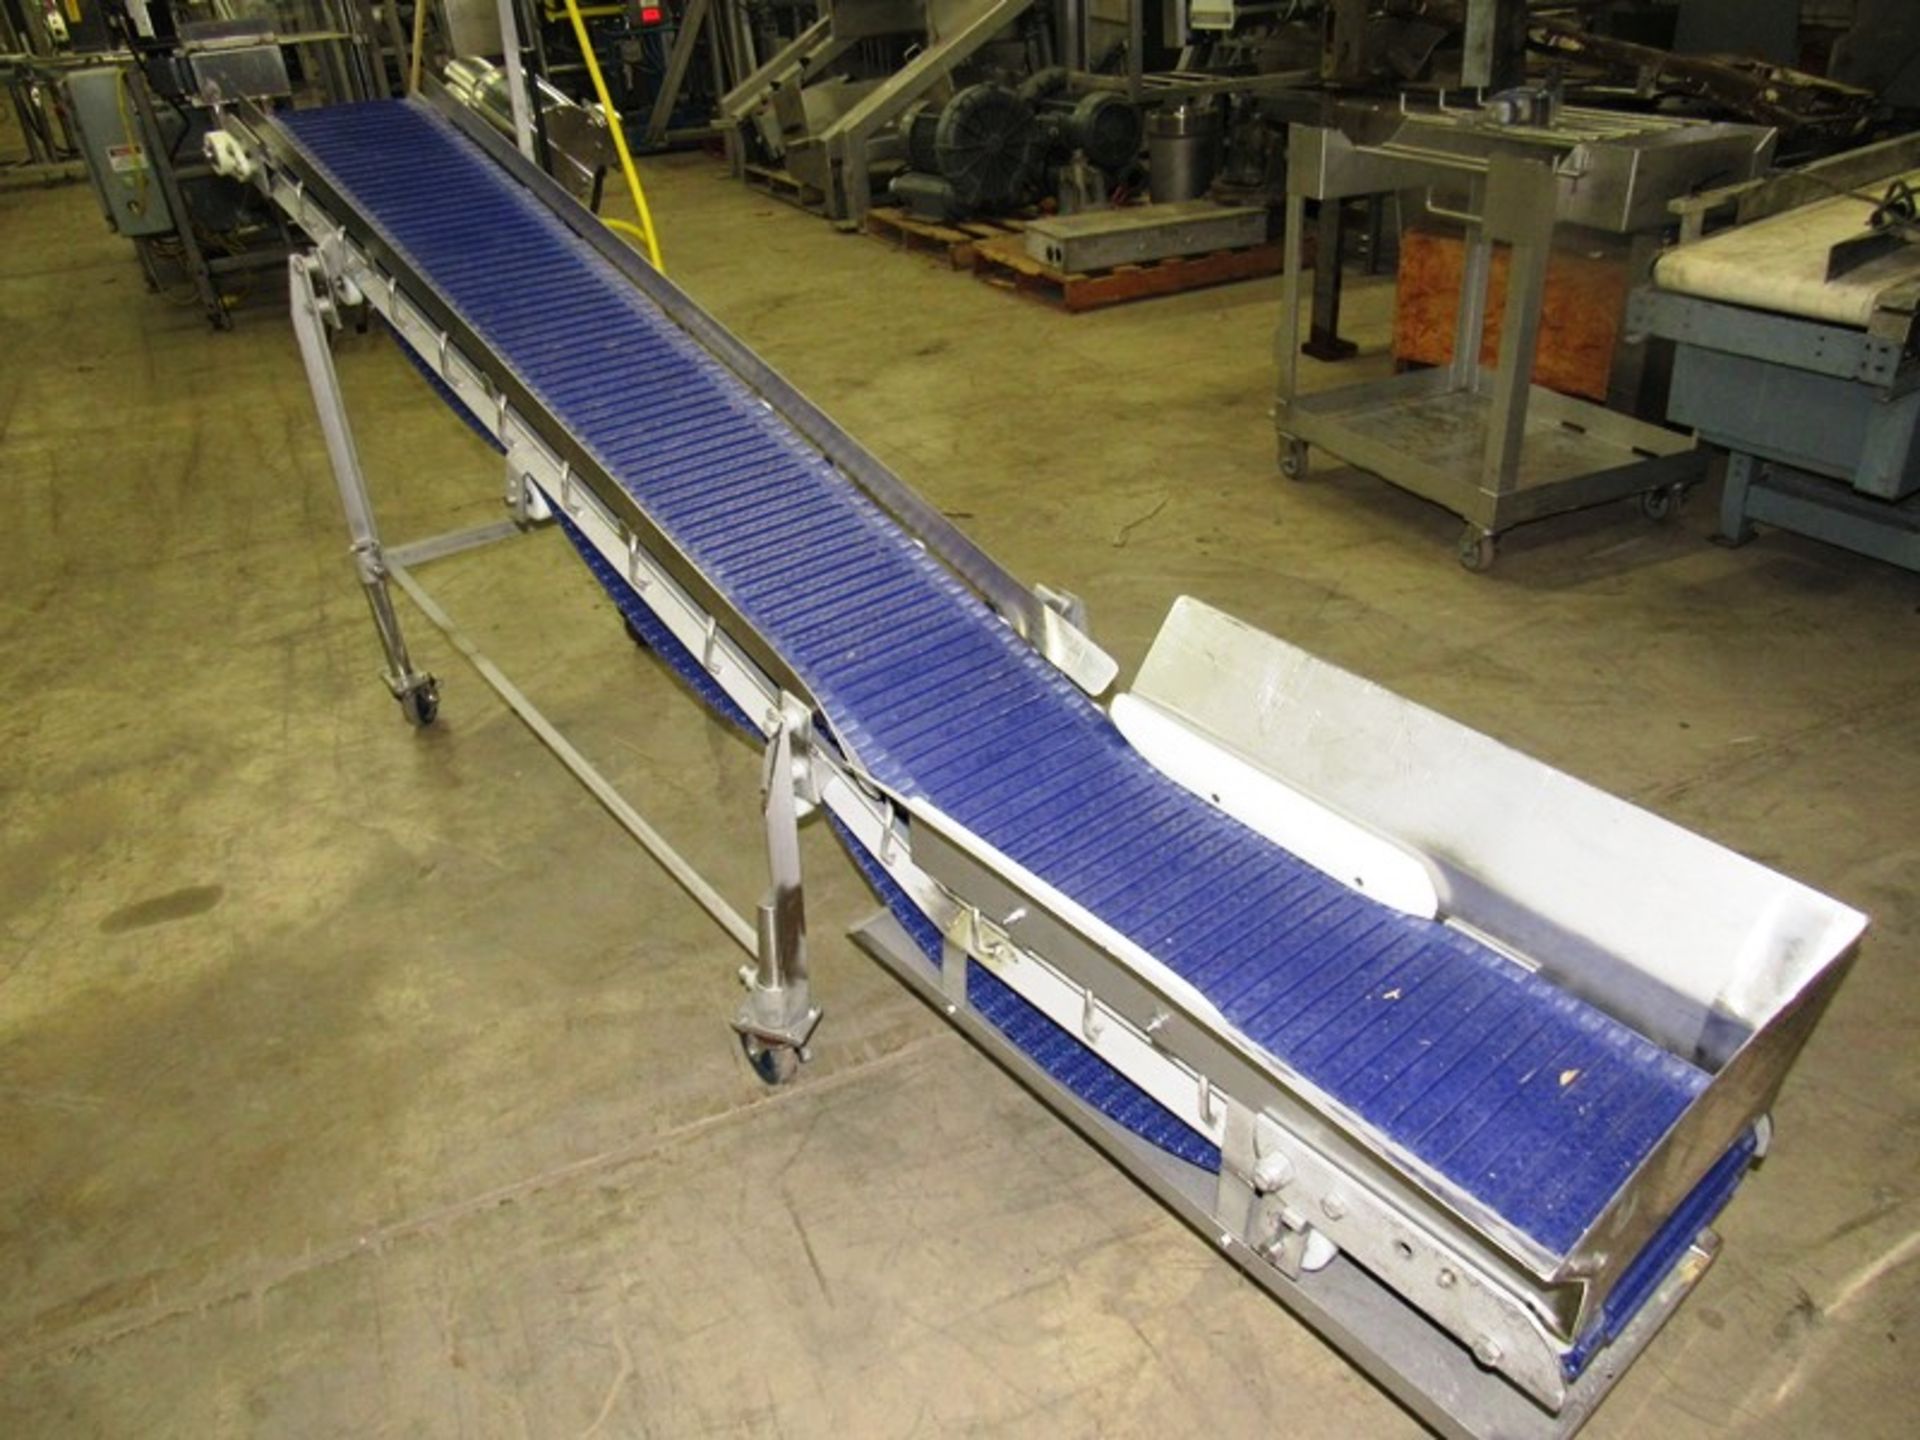 Stainless Steel Incline Conveyor, 12" W X 9' L cleated belt, 16" infeed height, 44" discharge, - Image 2 of 3